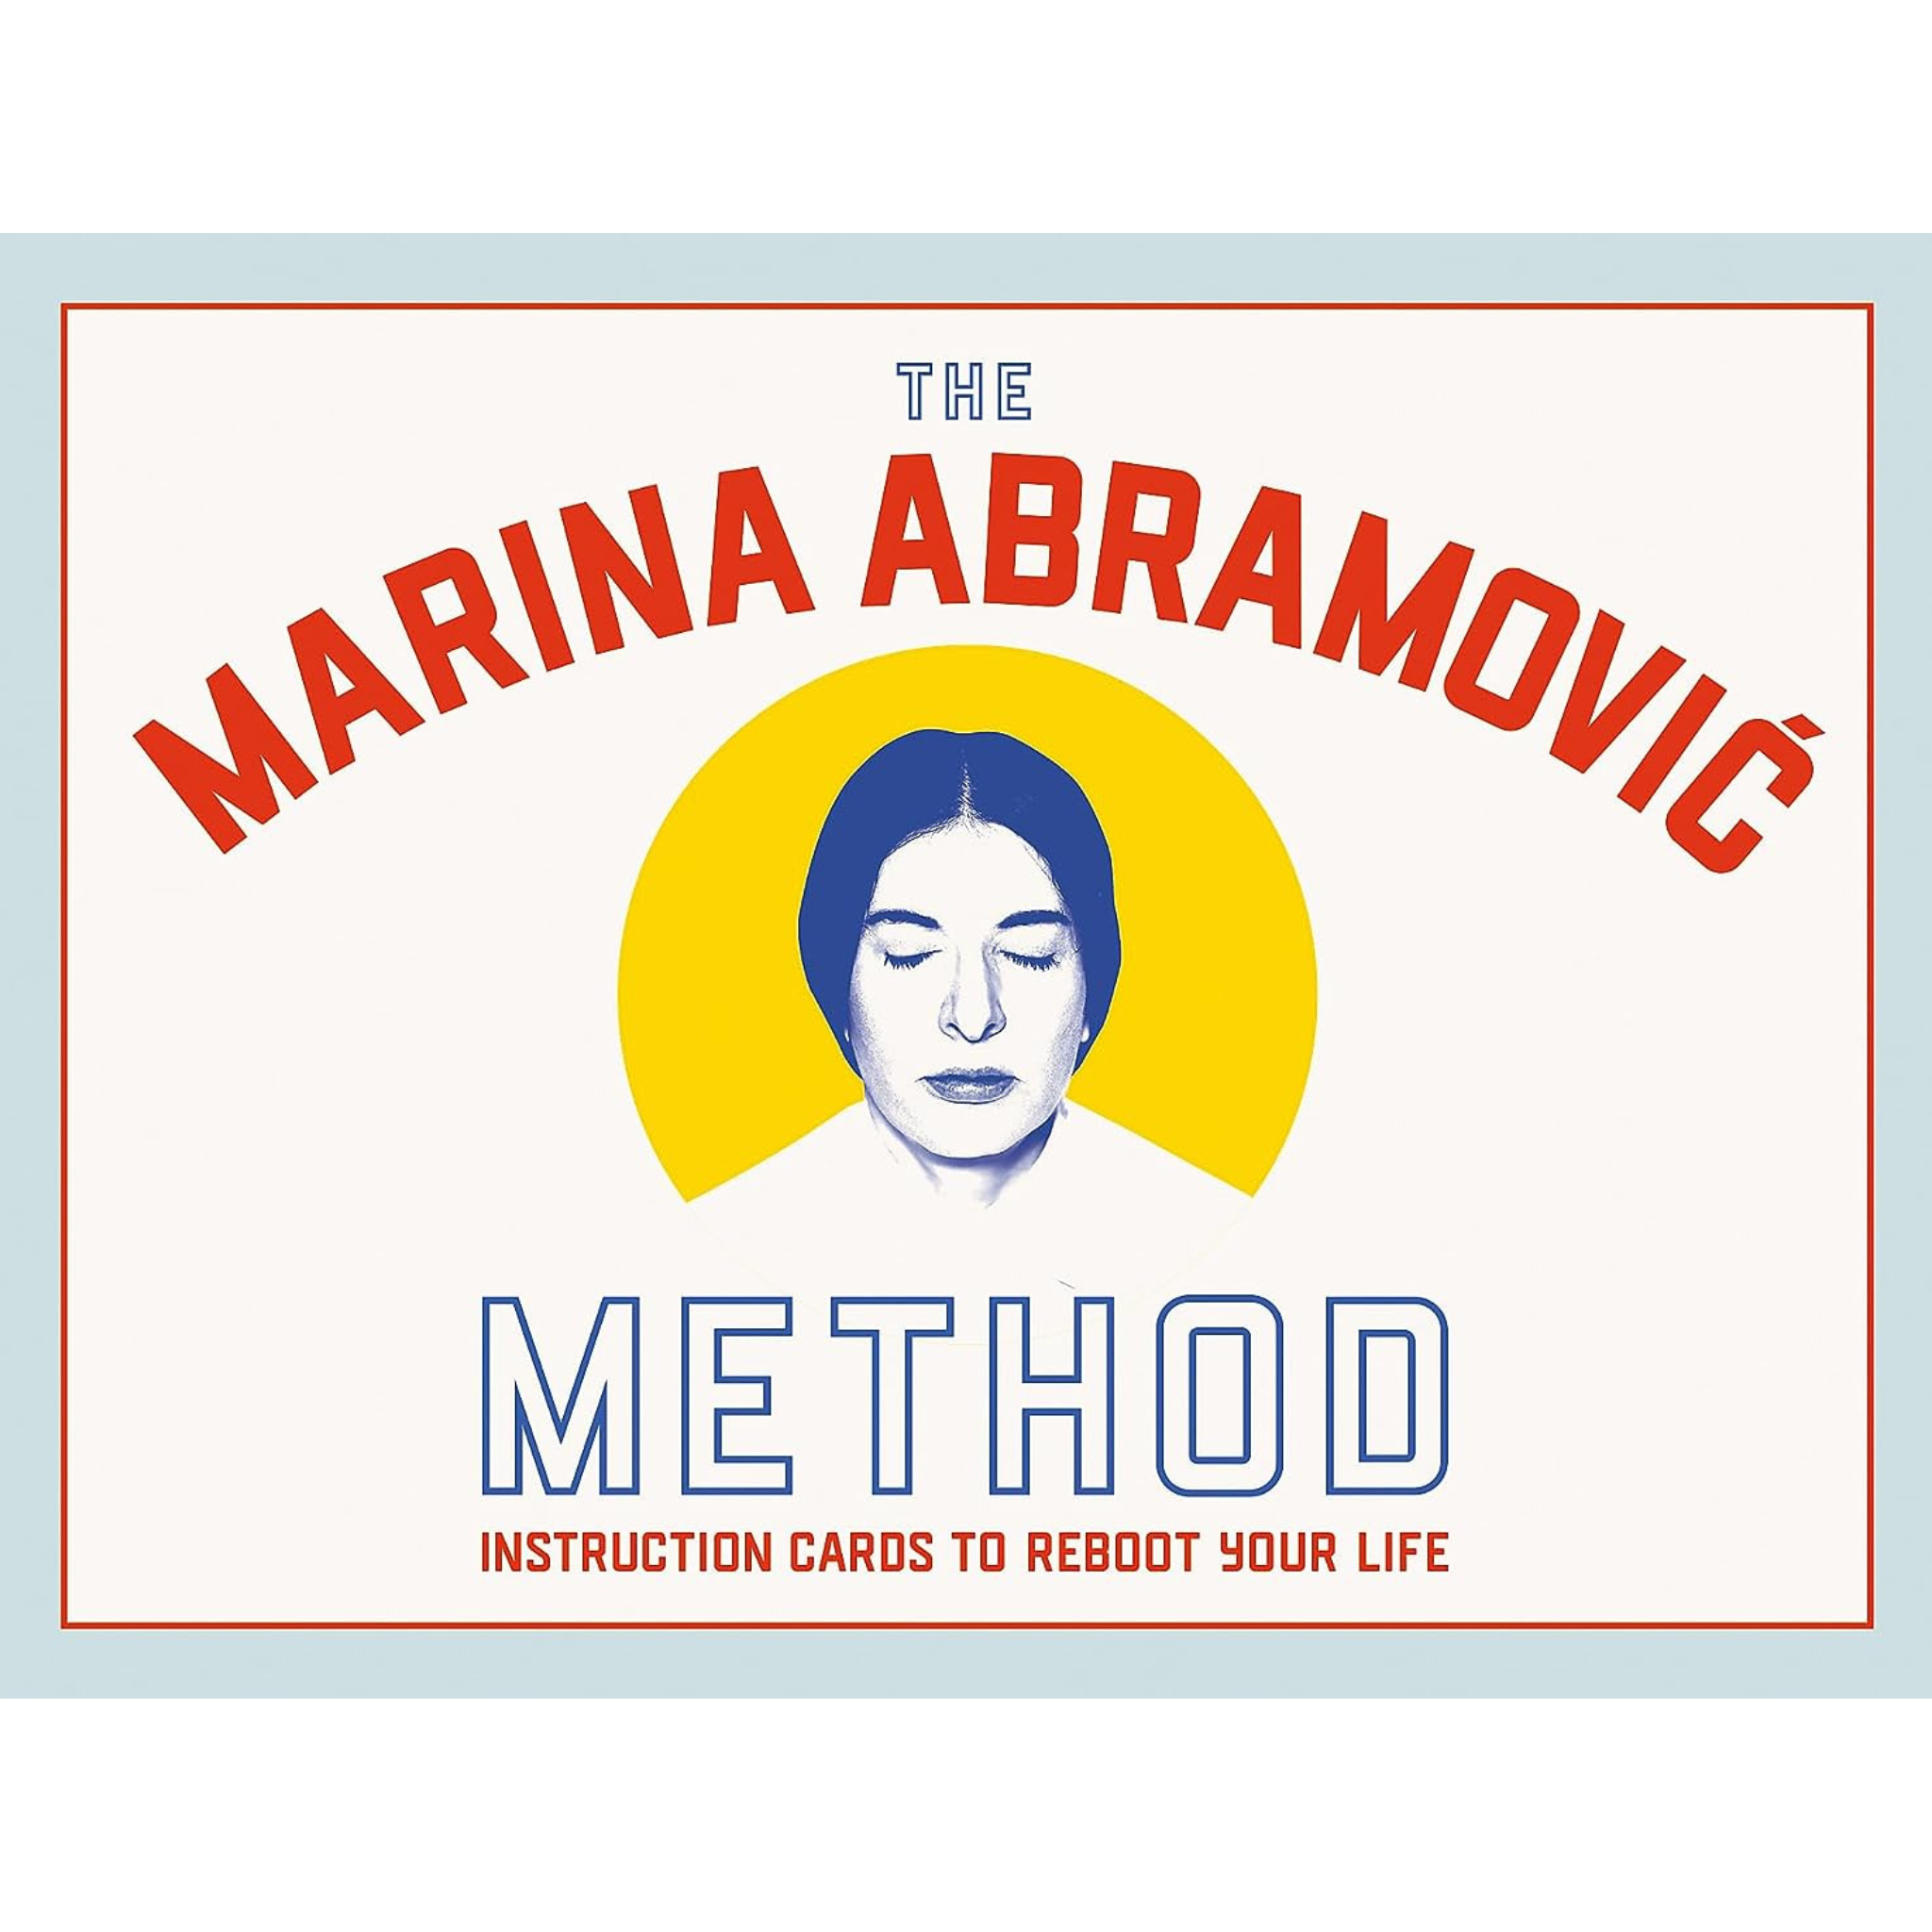 Cover of The Marina Abramovic Method cards